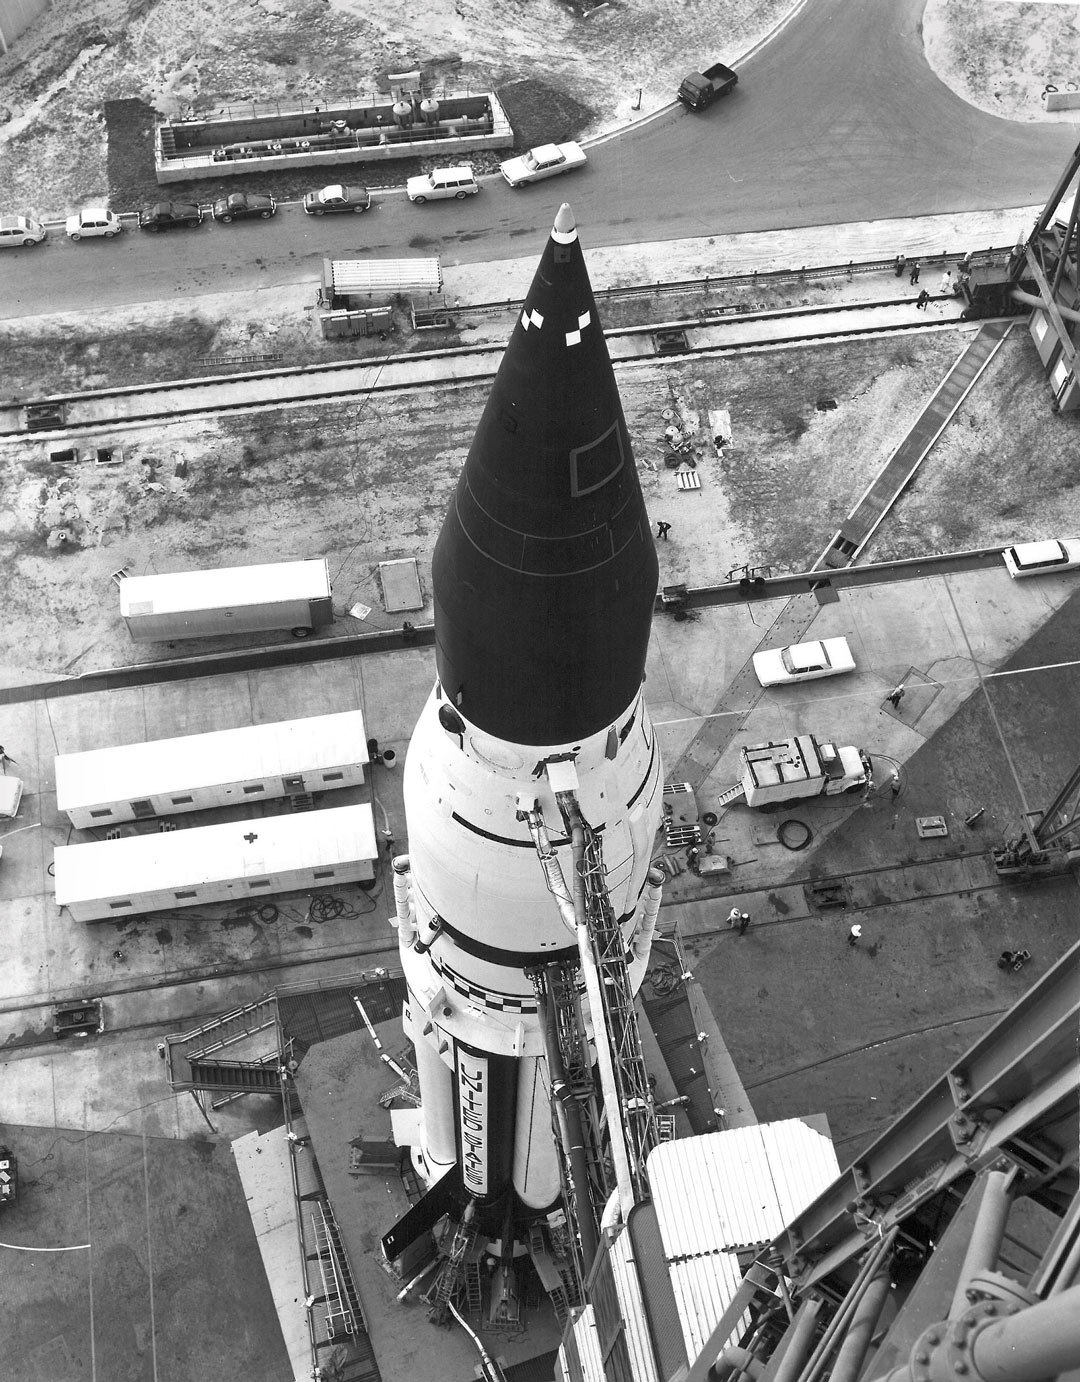 First Saturn I Block II rocket ready for launch, Kennedy Space Center, Cape Canaveral, Florida, 29 January 1964. From Sun and Moon